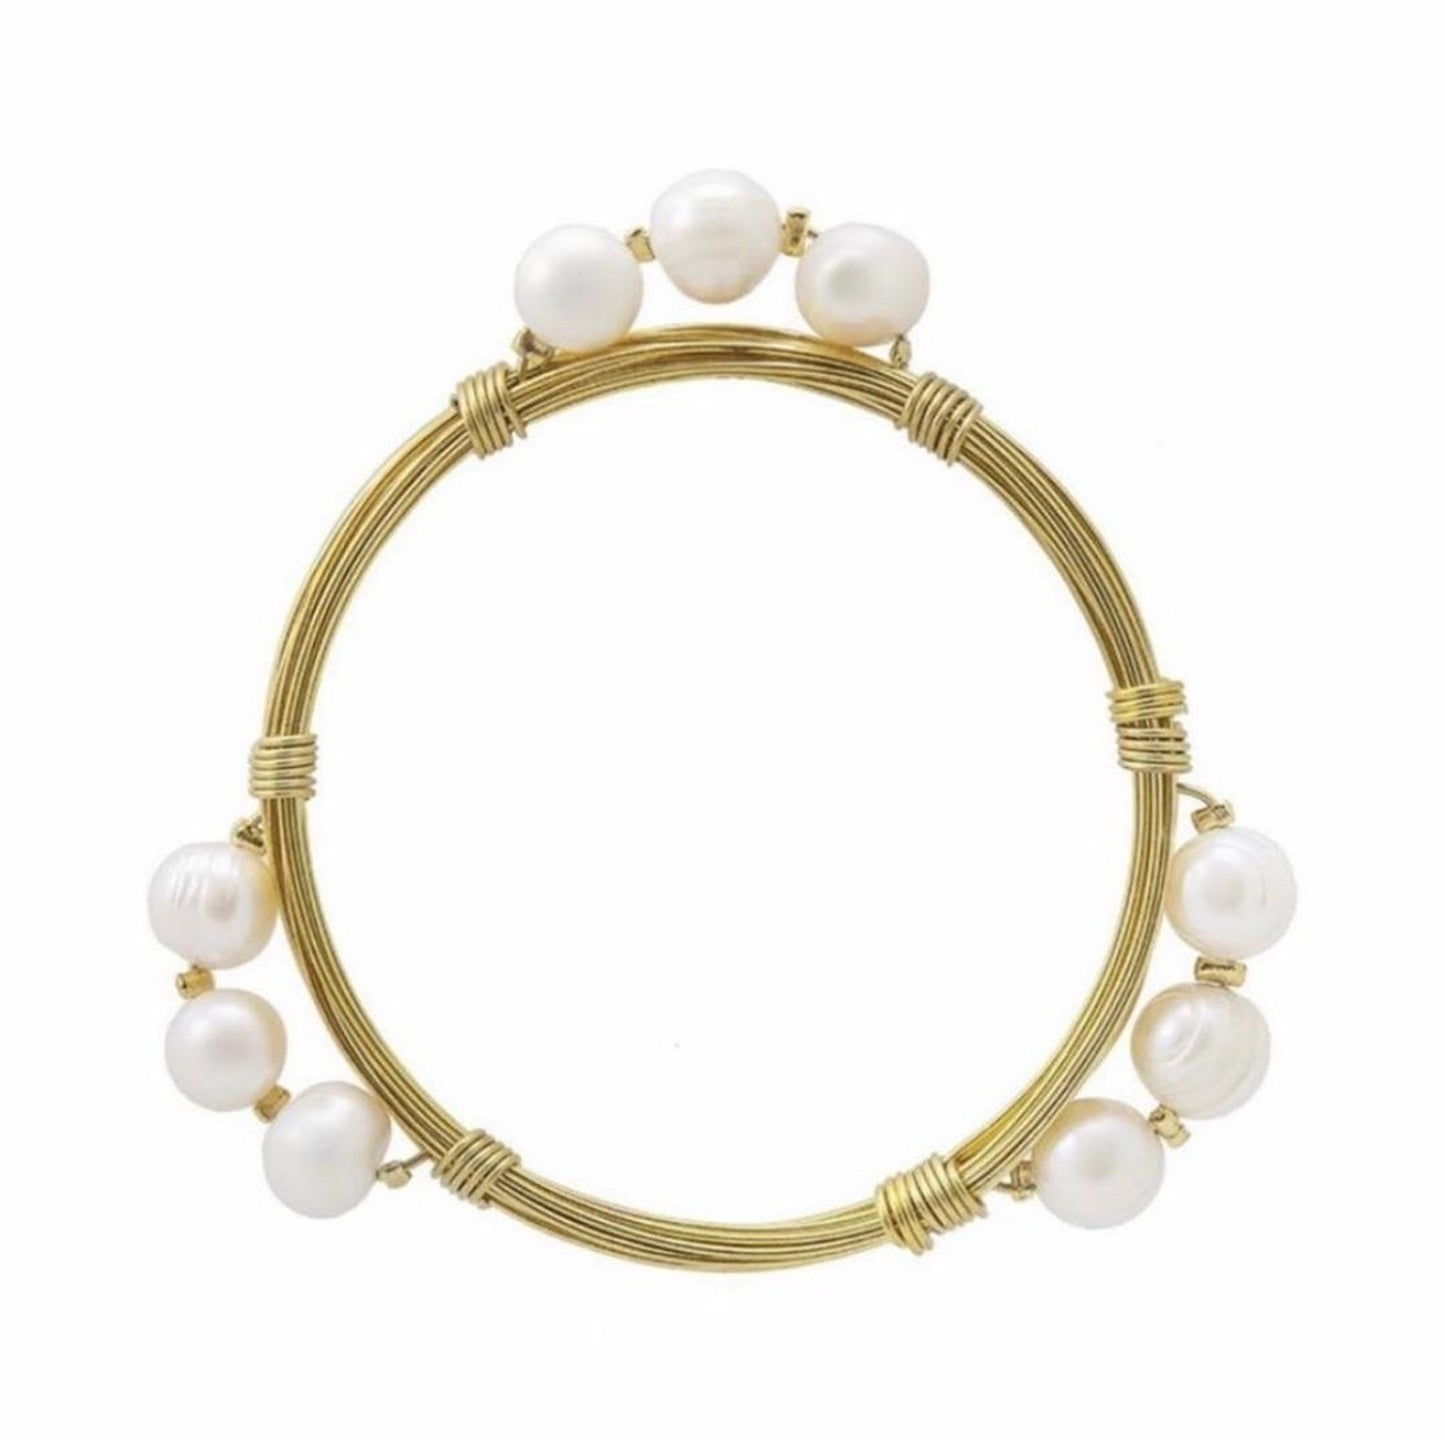 Handmade gold wire with pearls bracelet